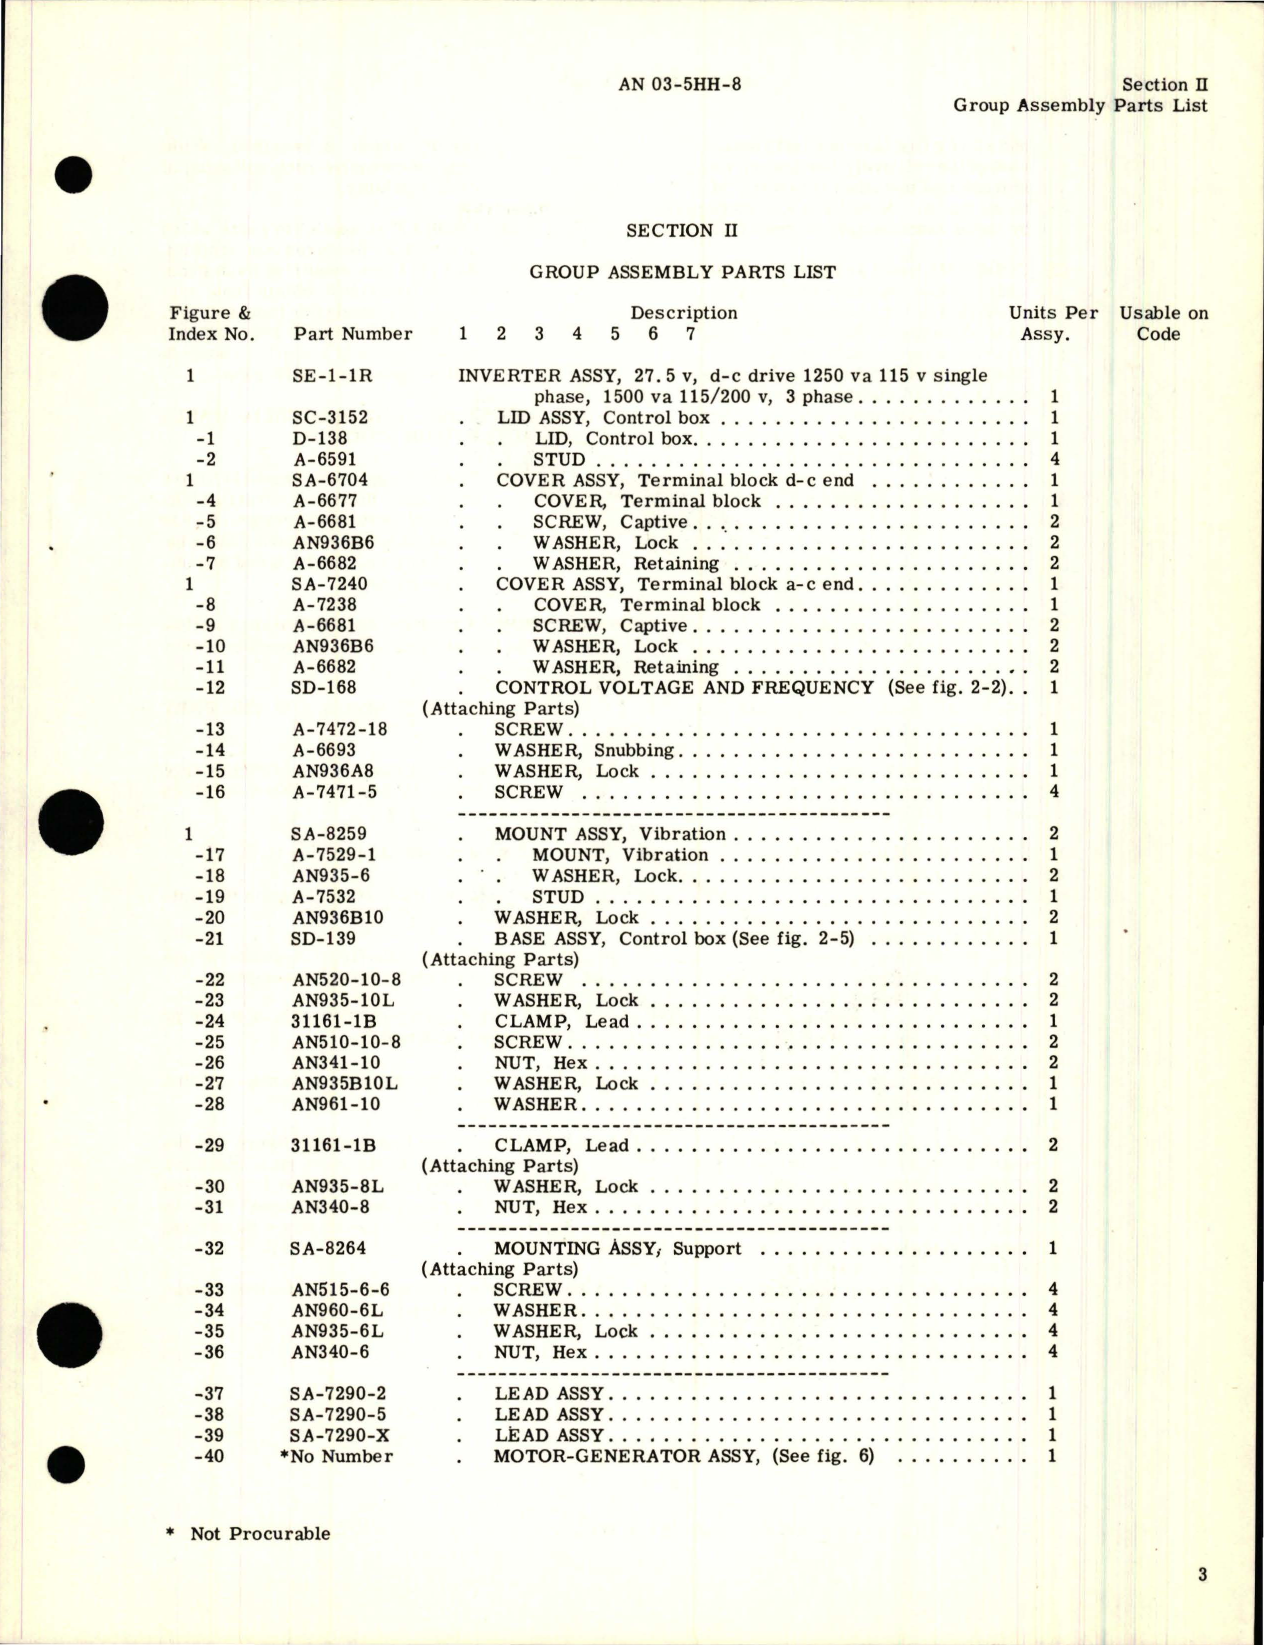 Sample page 7 from AirCorps Library document: Parts Catalog for Inverter - Part SE-1-1R